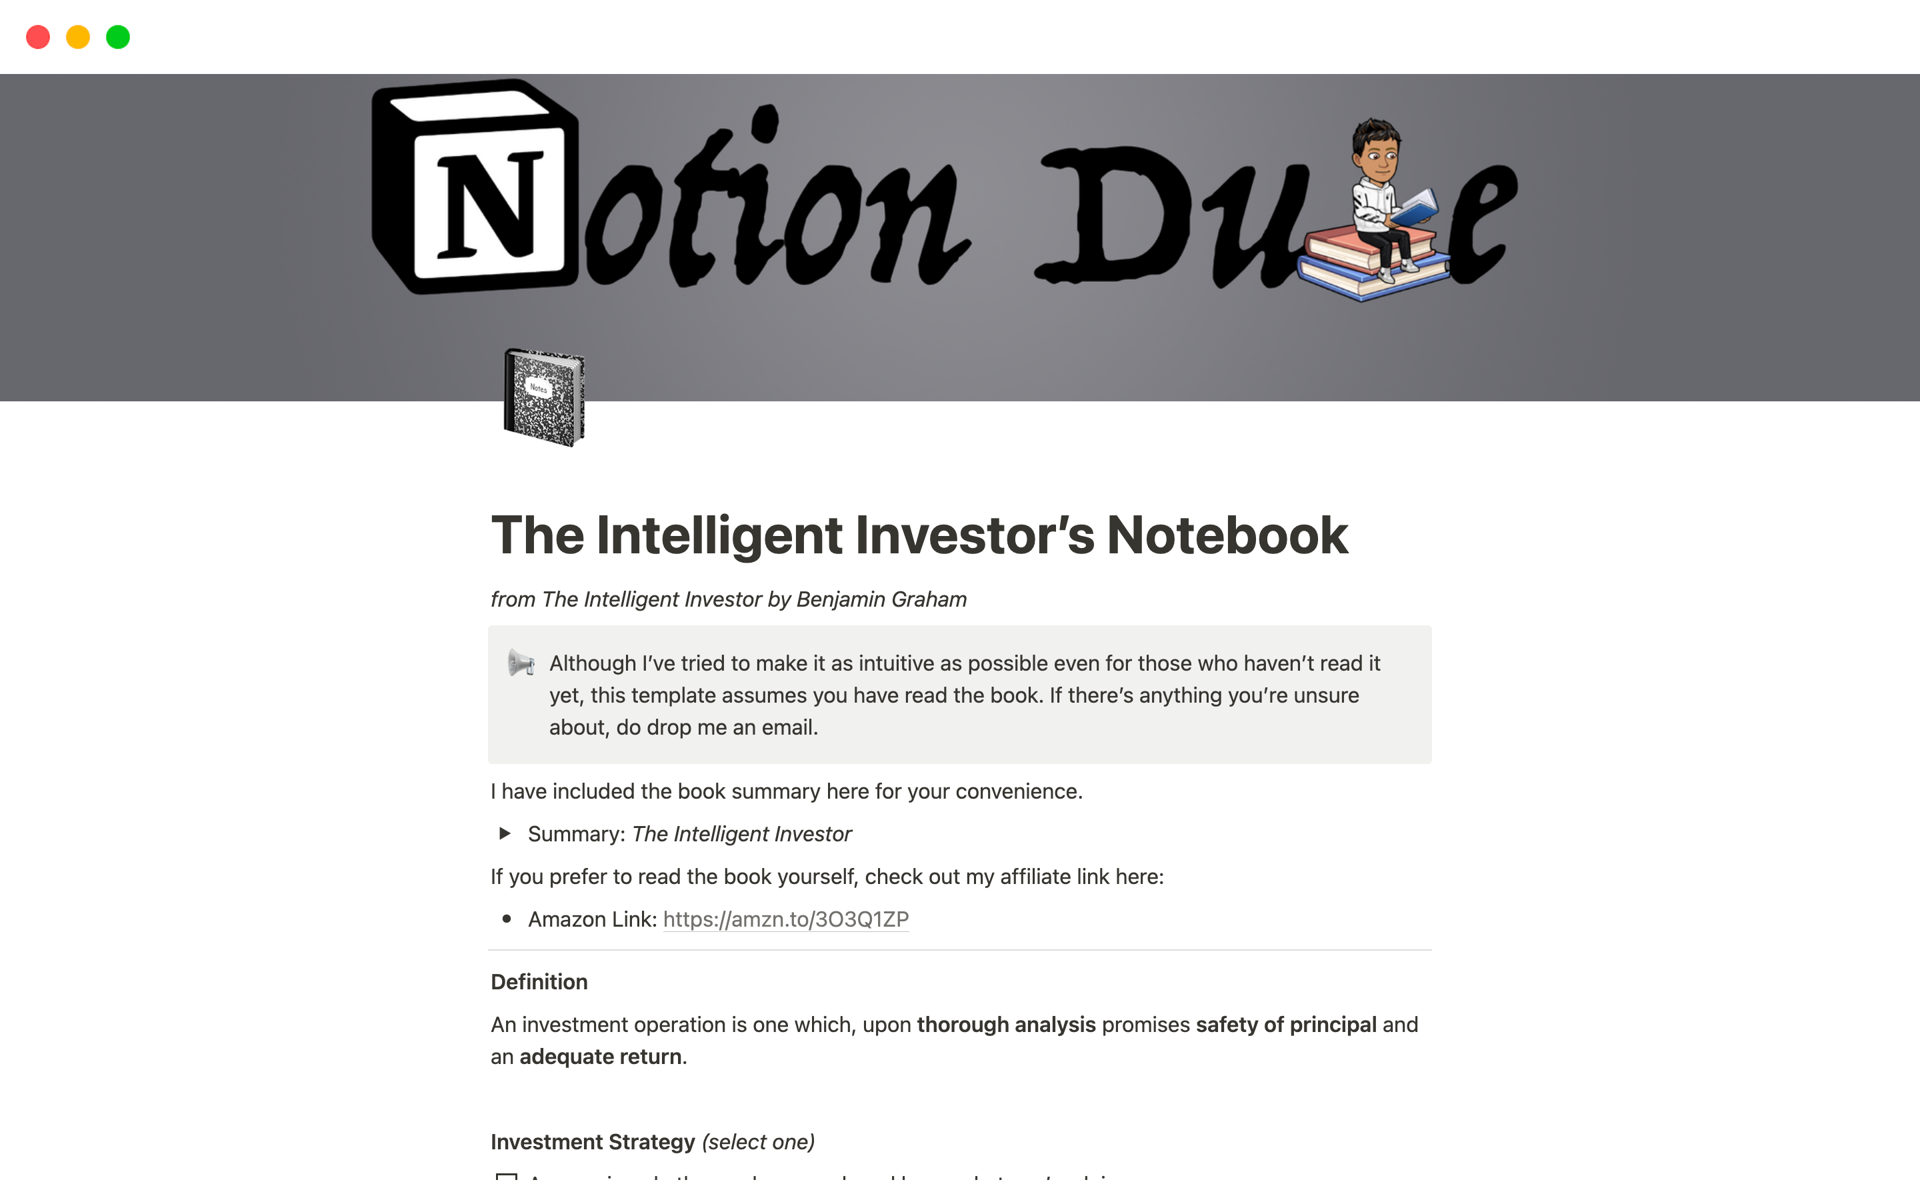 Apply the knowledge from The Intelligent Investor into your daily life.